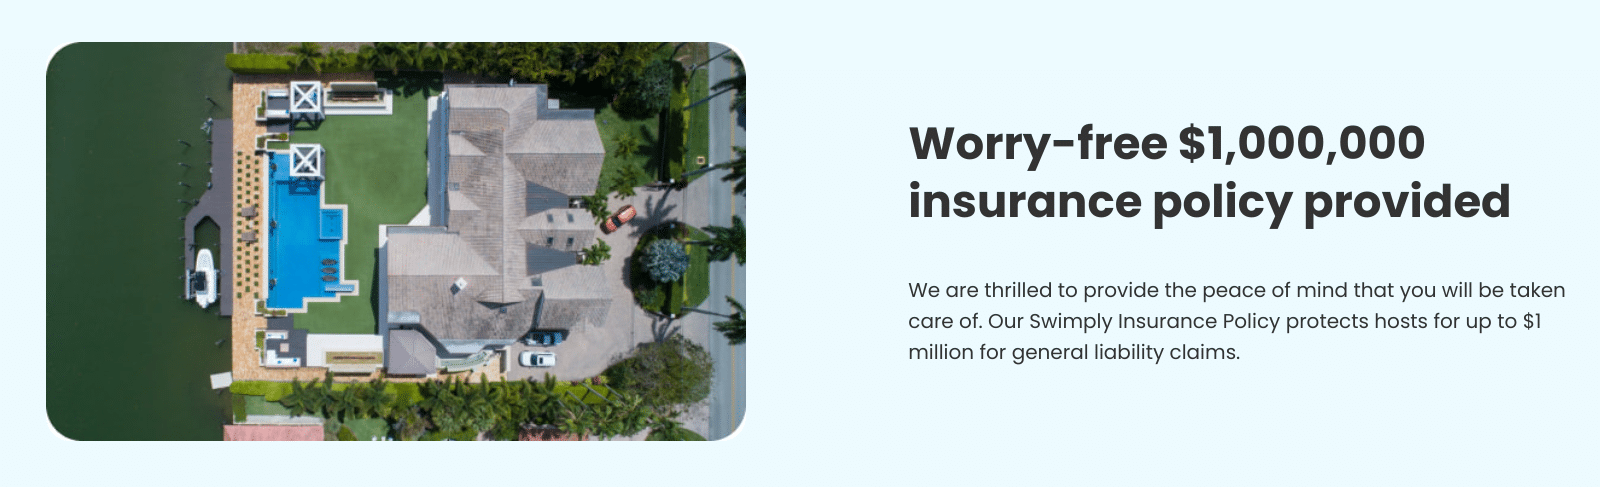 Screenshot of Swimply's website description of its insurance policy